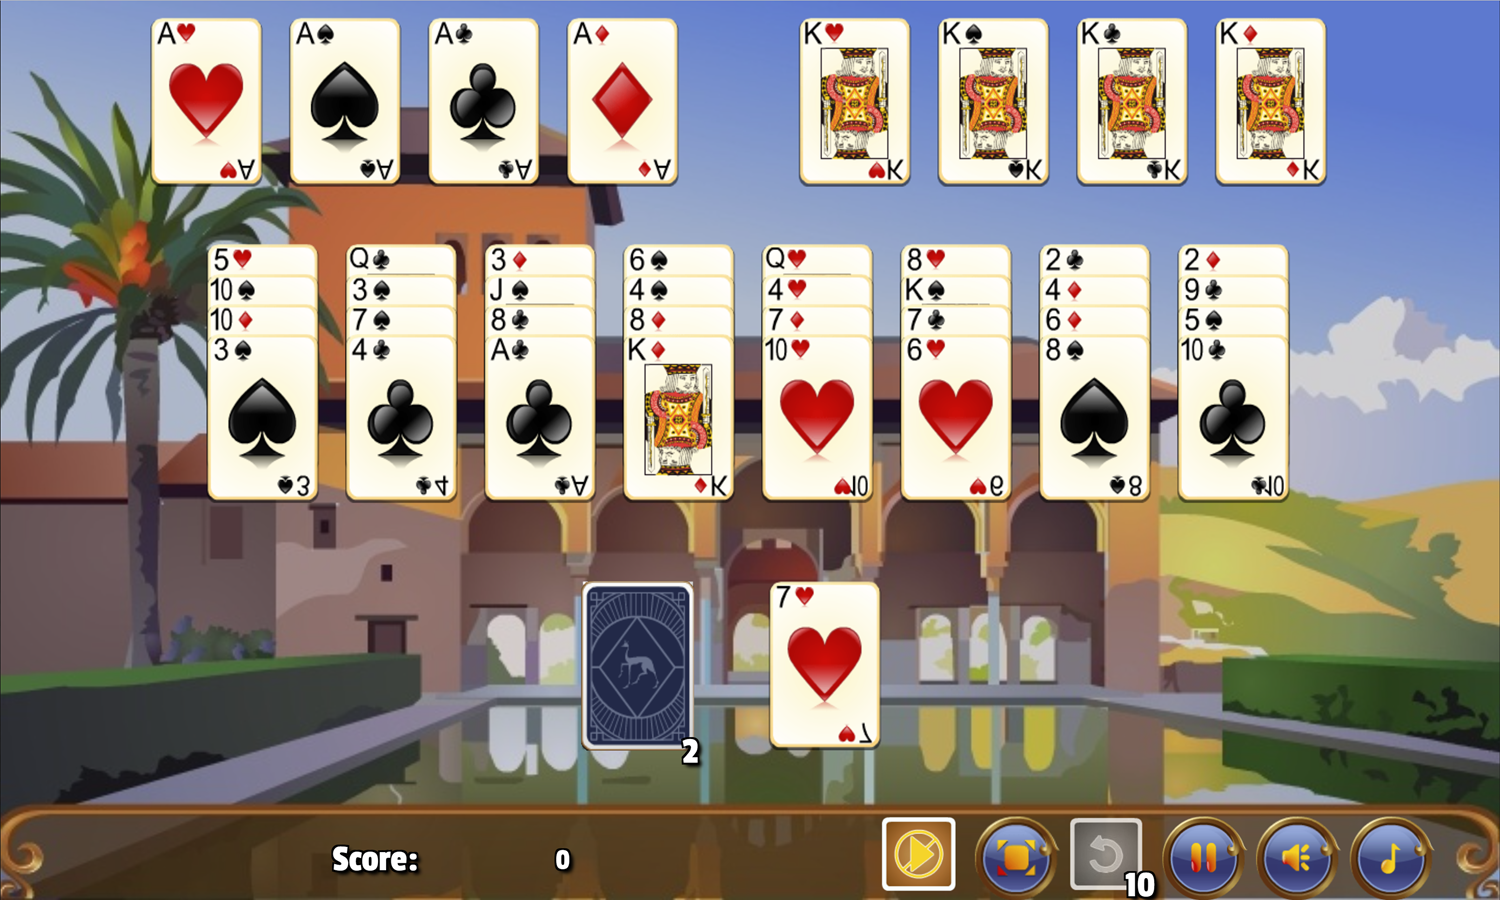 Alhambra Solitaire Game Deal Screenshot.